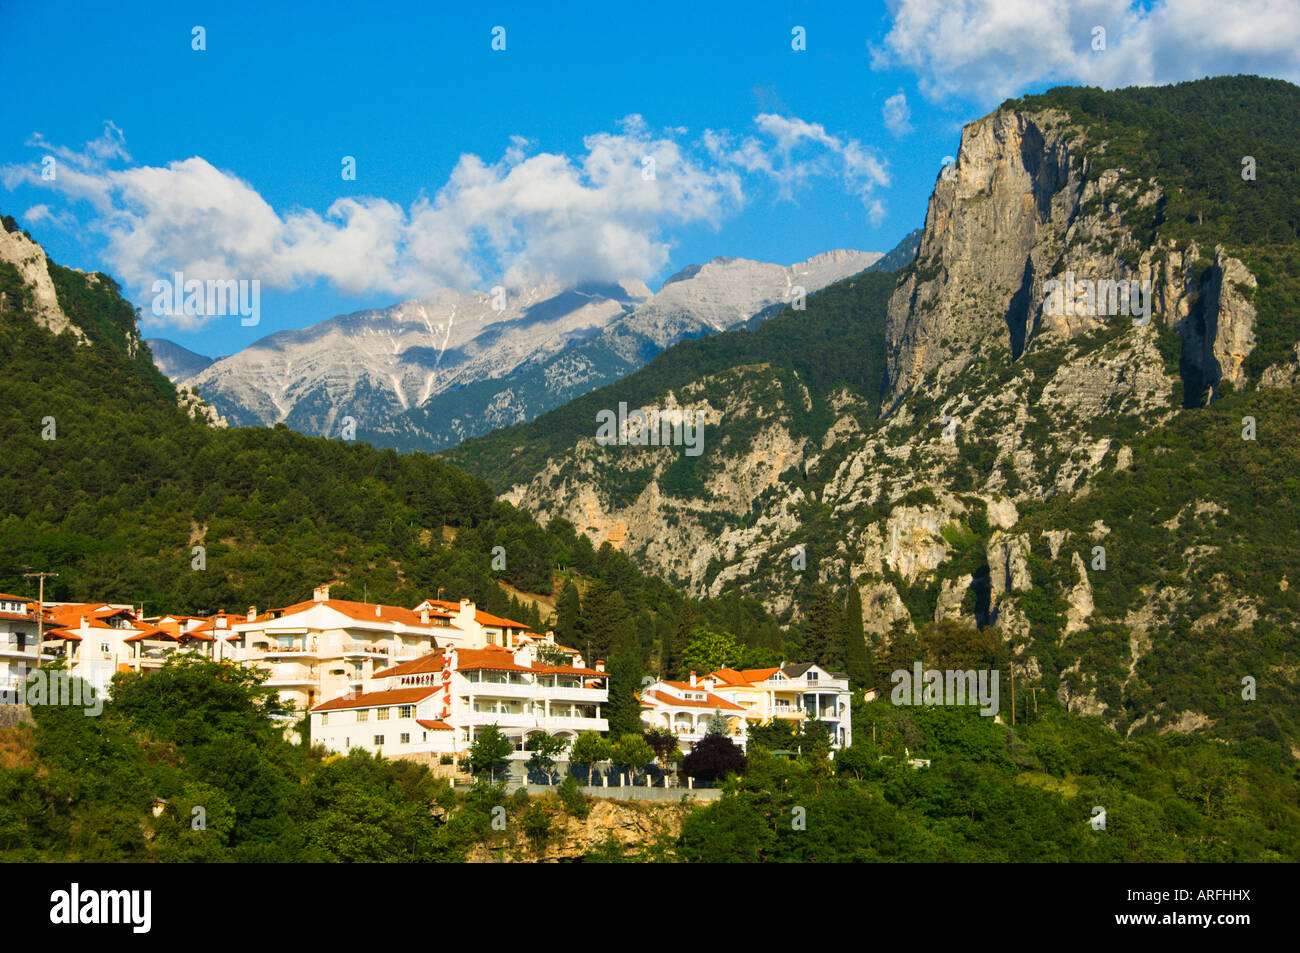 Mount Olympus and the village of Litohor Greece Stock Photo